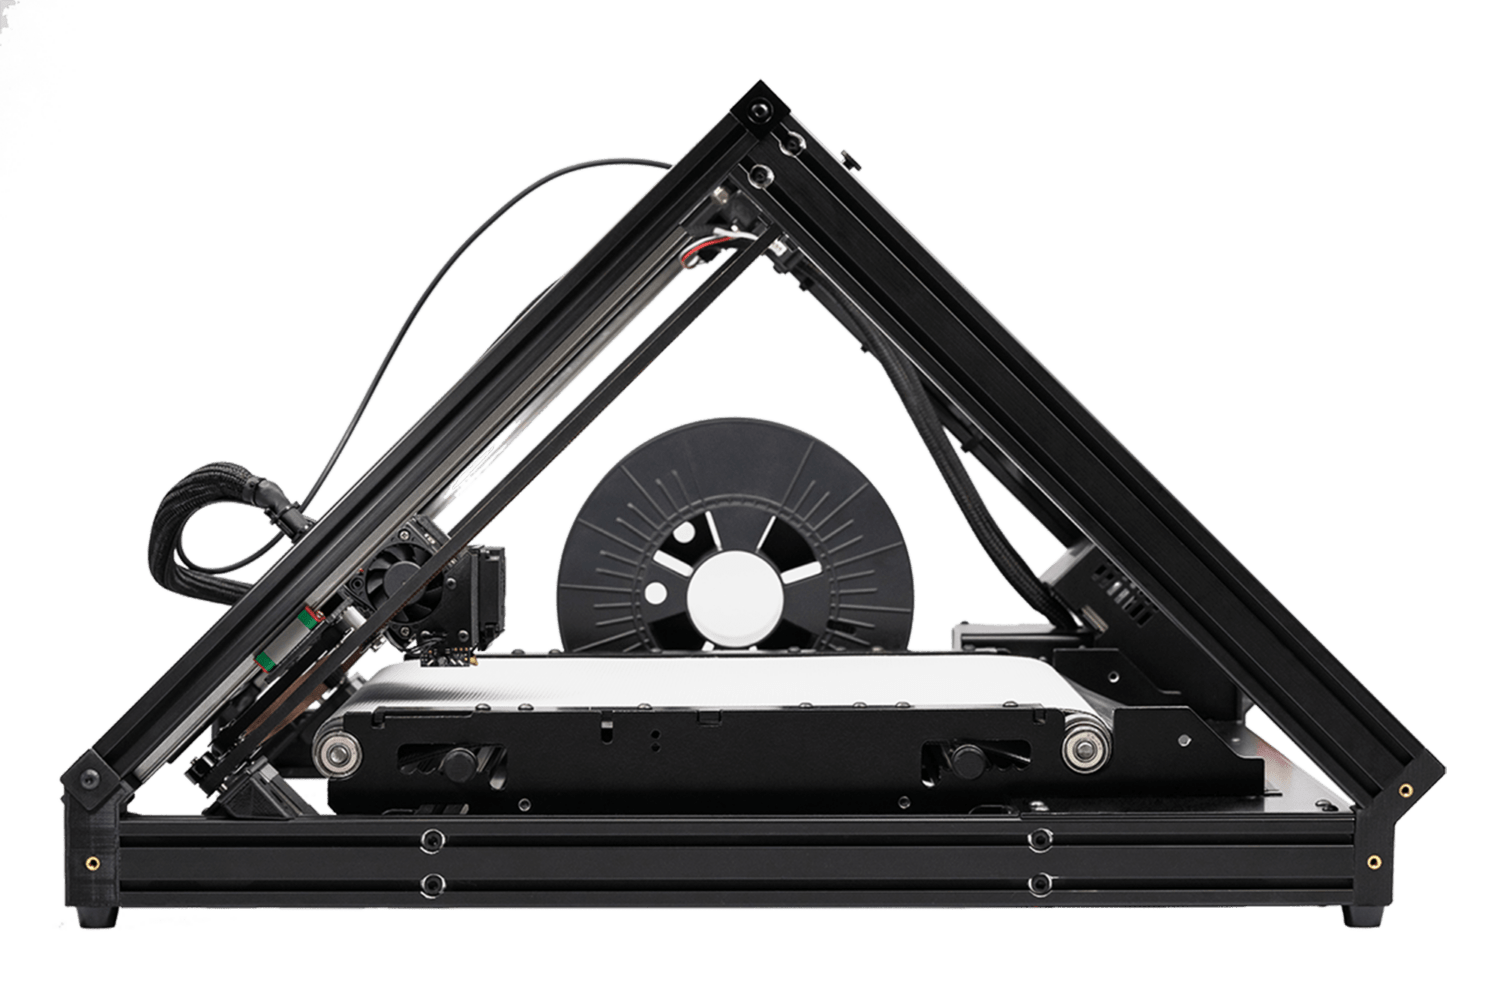 The pyramid-shaped 3D printer with conveyor belt from the side. The frame construction brings high stability and thus enables particularly fast printing times for the continuous objects